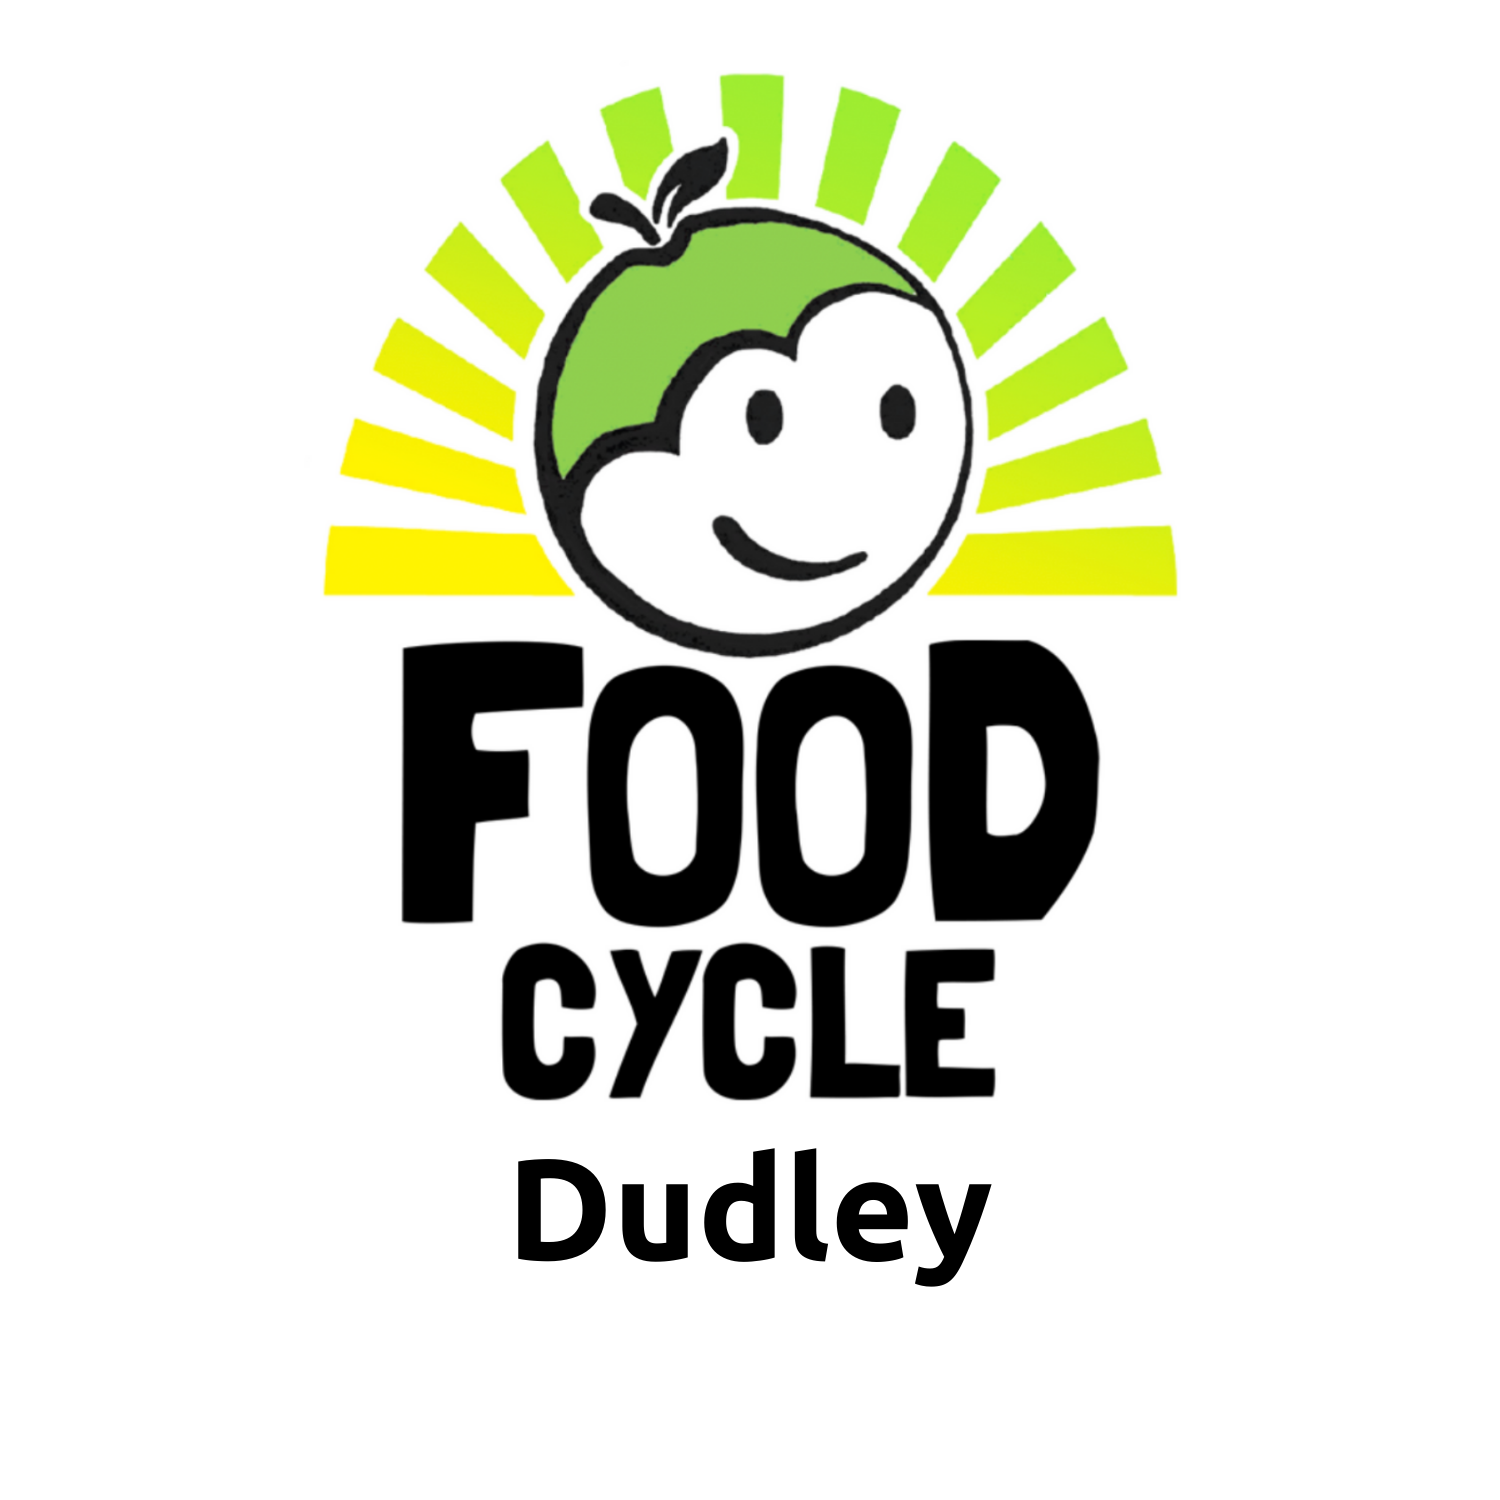 FoodCycle Dudley - Luncheon Club